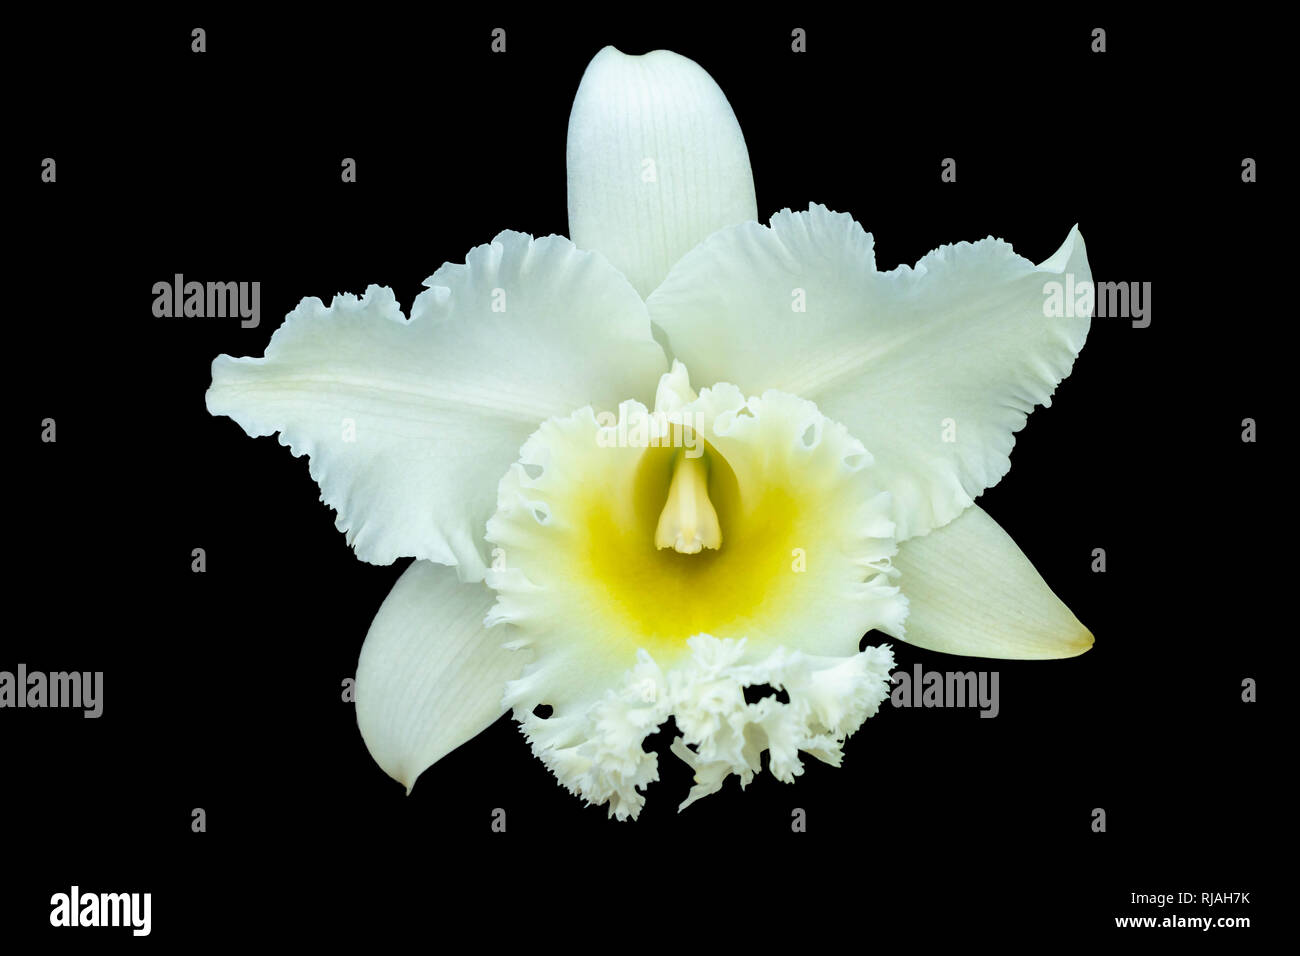 White Cattleya orchid Cattleya are orchid with white petals are layer yellow pollen Cattleya have clipping path on black background. Stock Photo